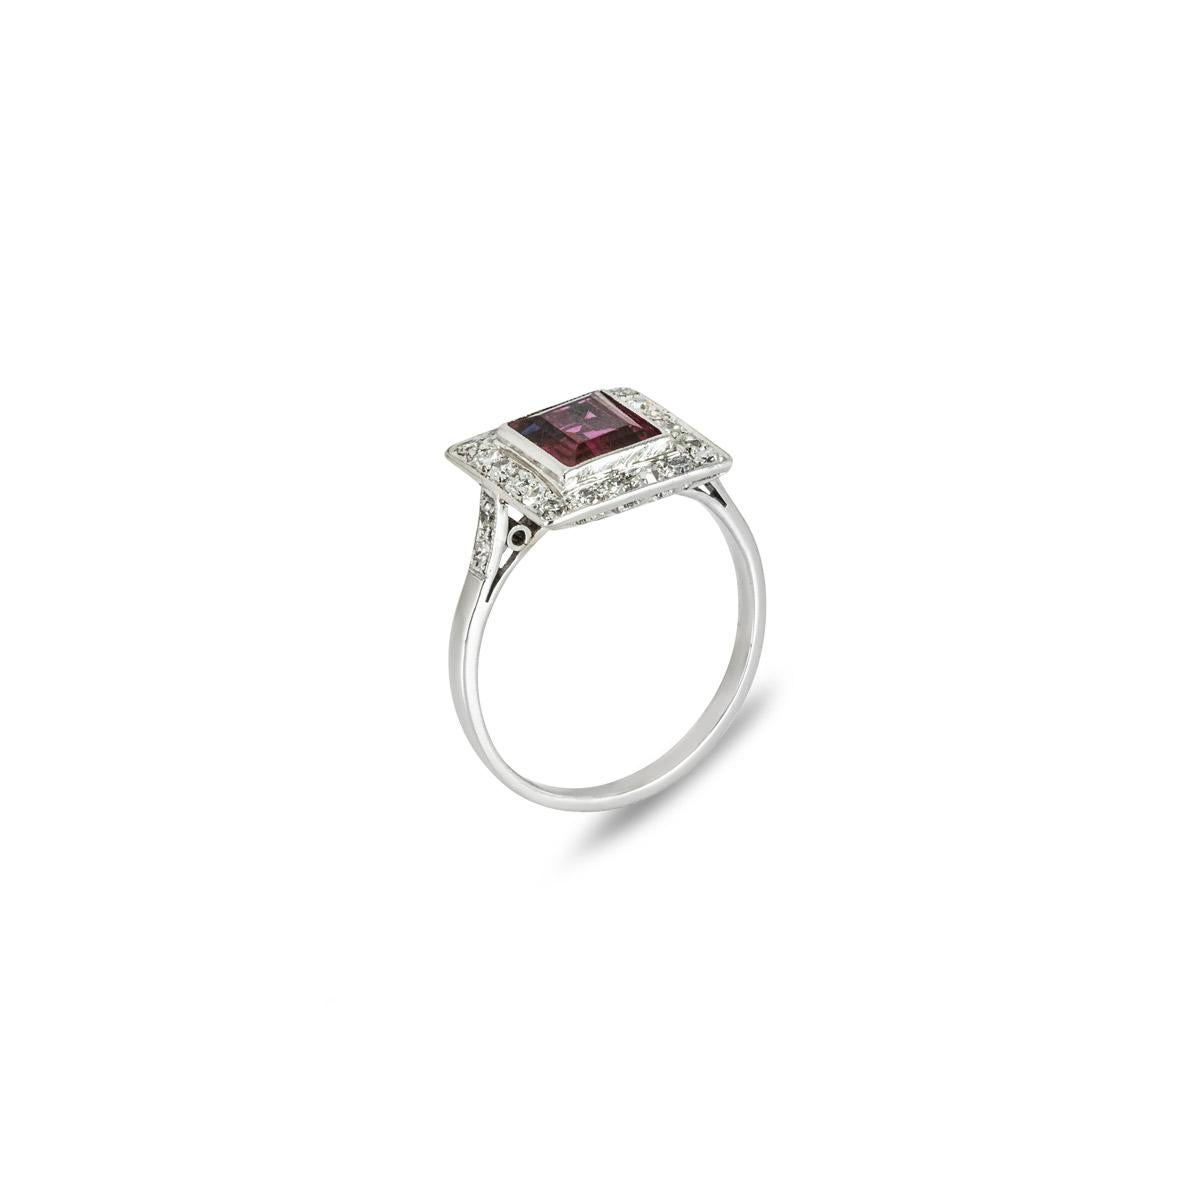 A timeless platinum ruby and diamond dress ring. Set to the centre in a bezel mount is a rectangular cut ruby weighing approximately 1.30ct and displaying a medium-dark purplish-red hue. Accentuating the ruby are 24 single cut diamonds set around